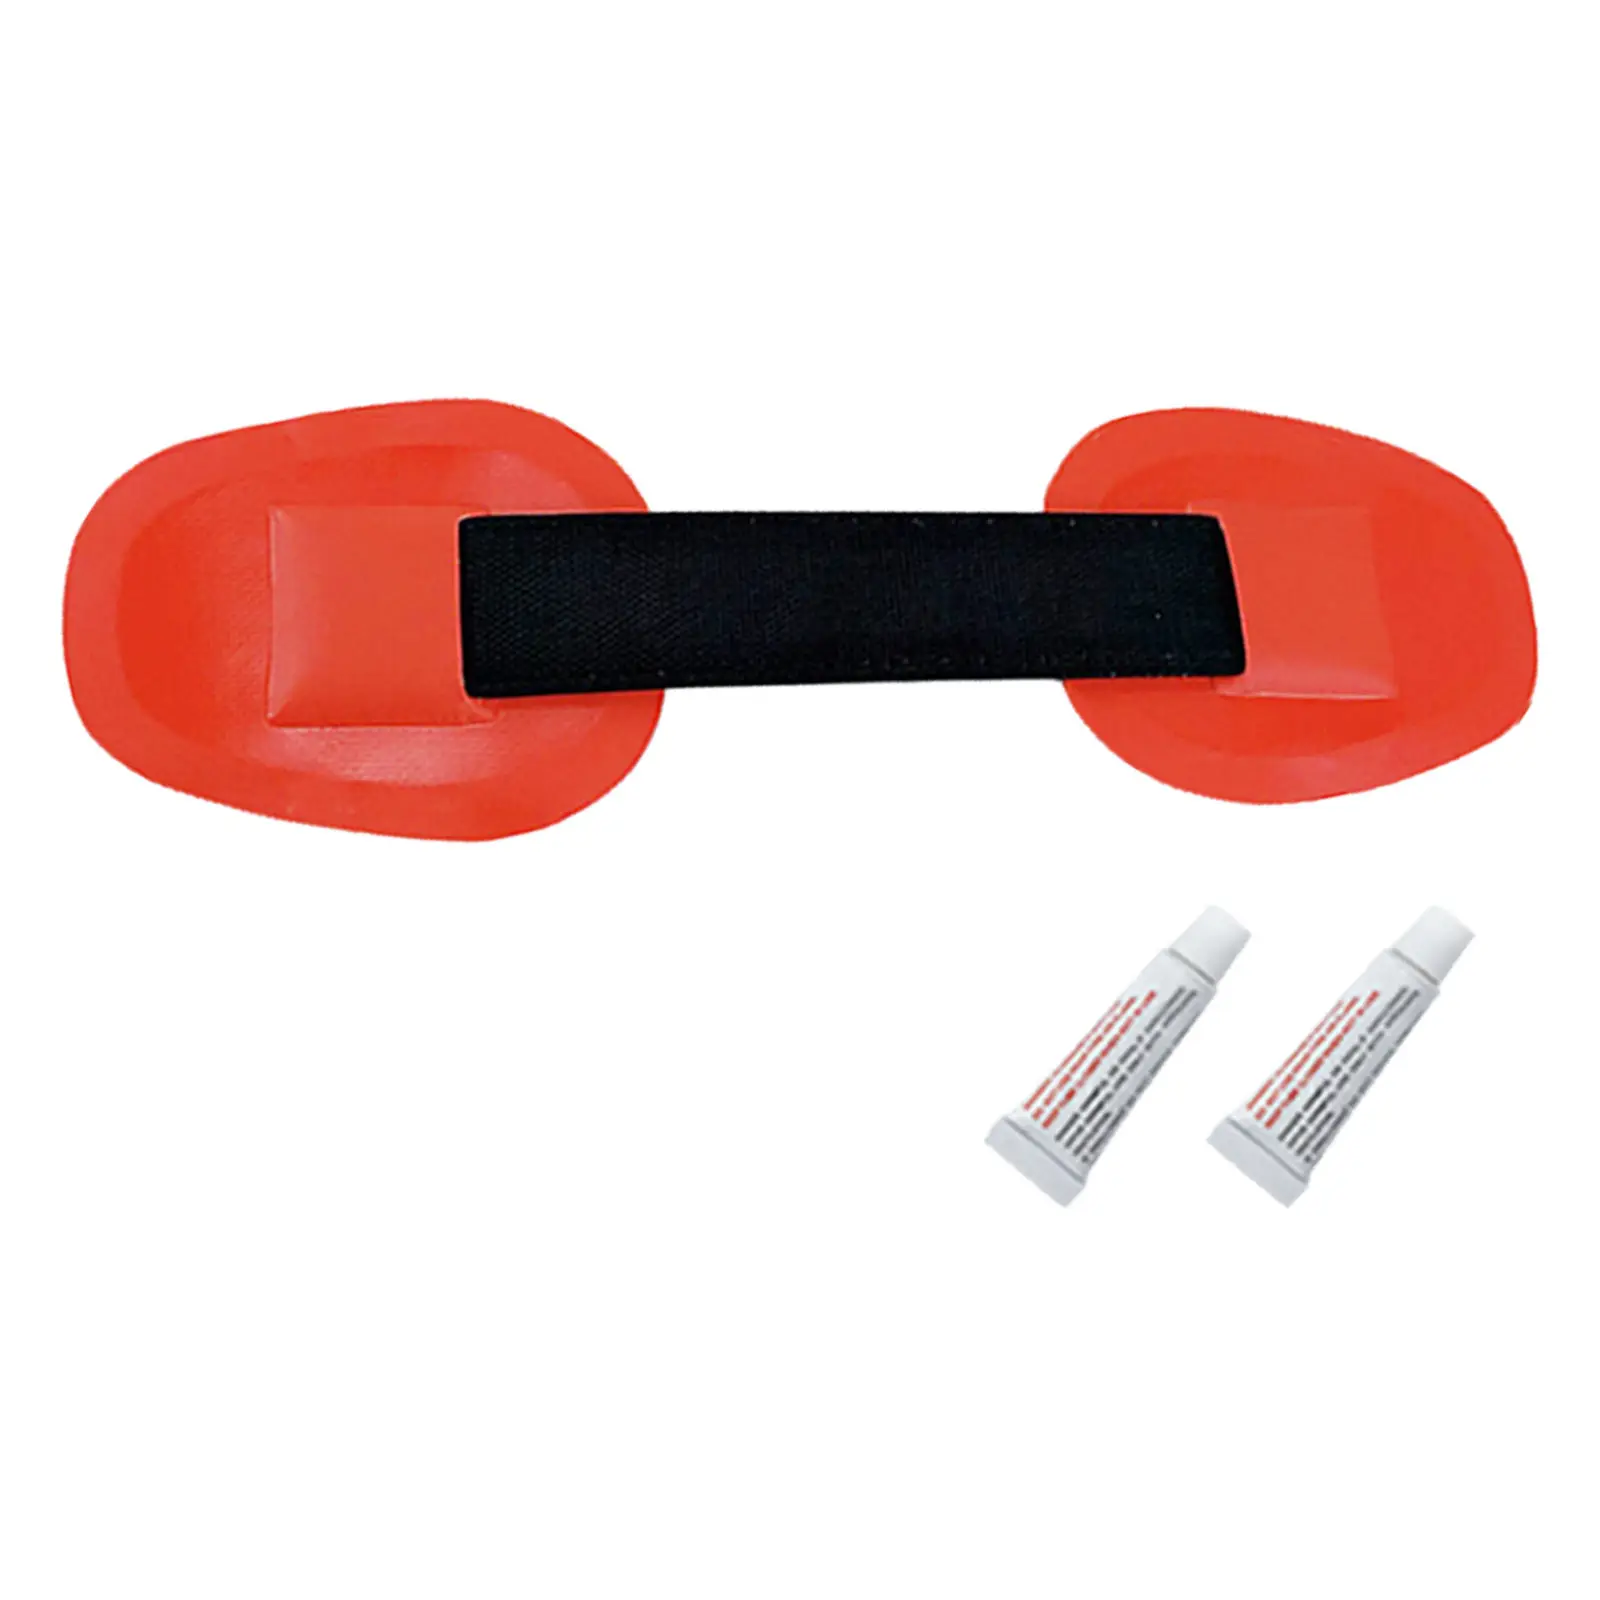 PVC Seat Strap Patch Fixed Webbing Handle Patch for Inflatable Boats Surfboard Rafts Marine Accessories Glue Included